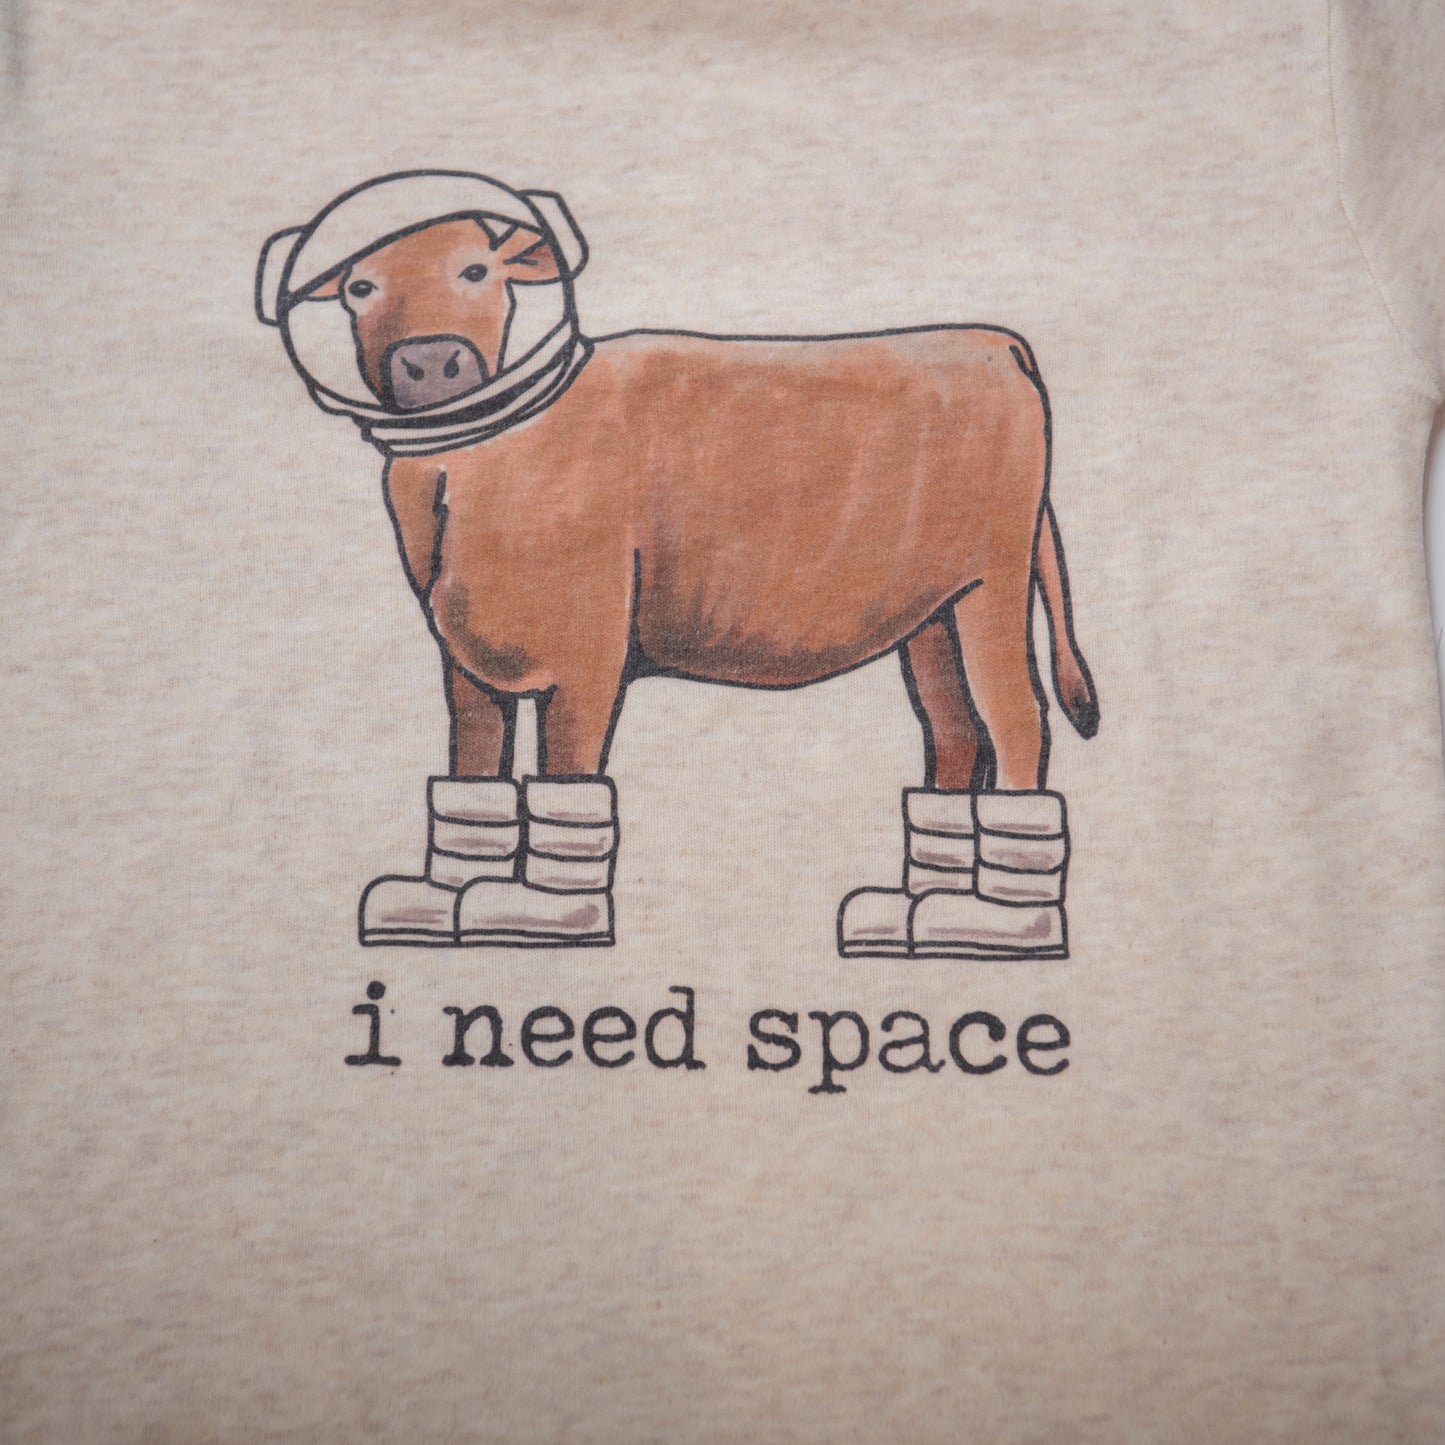 I Need Space T-Shirt